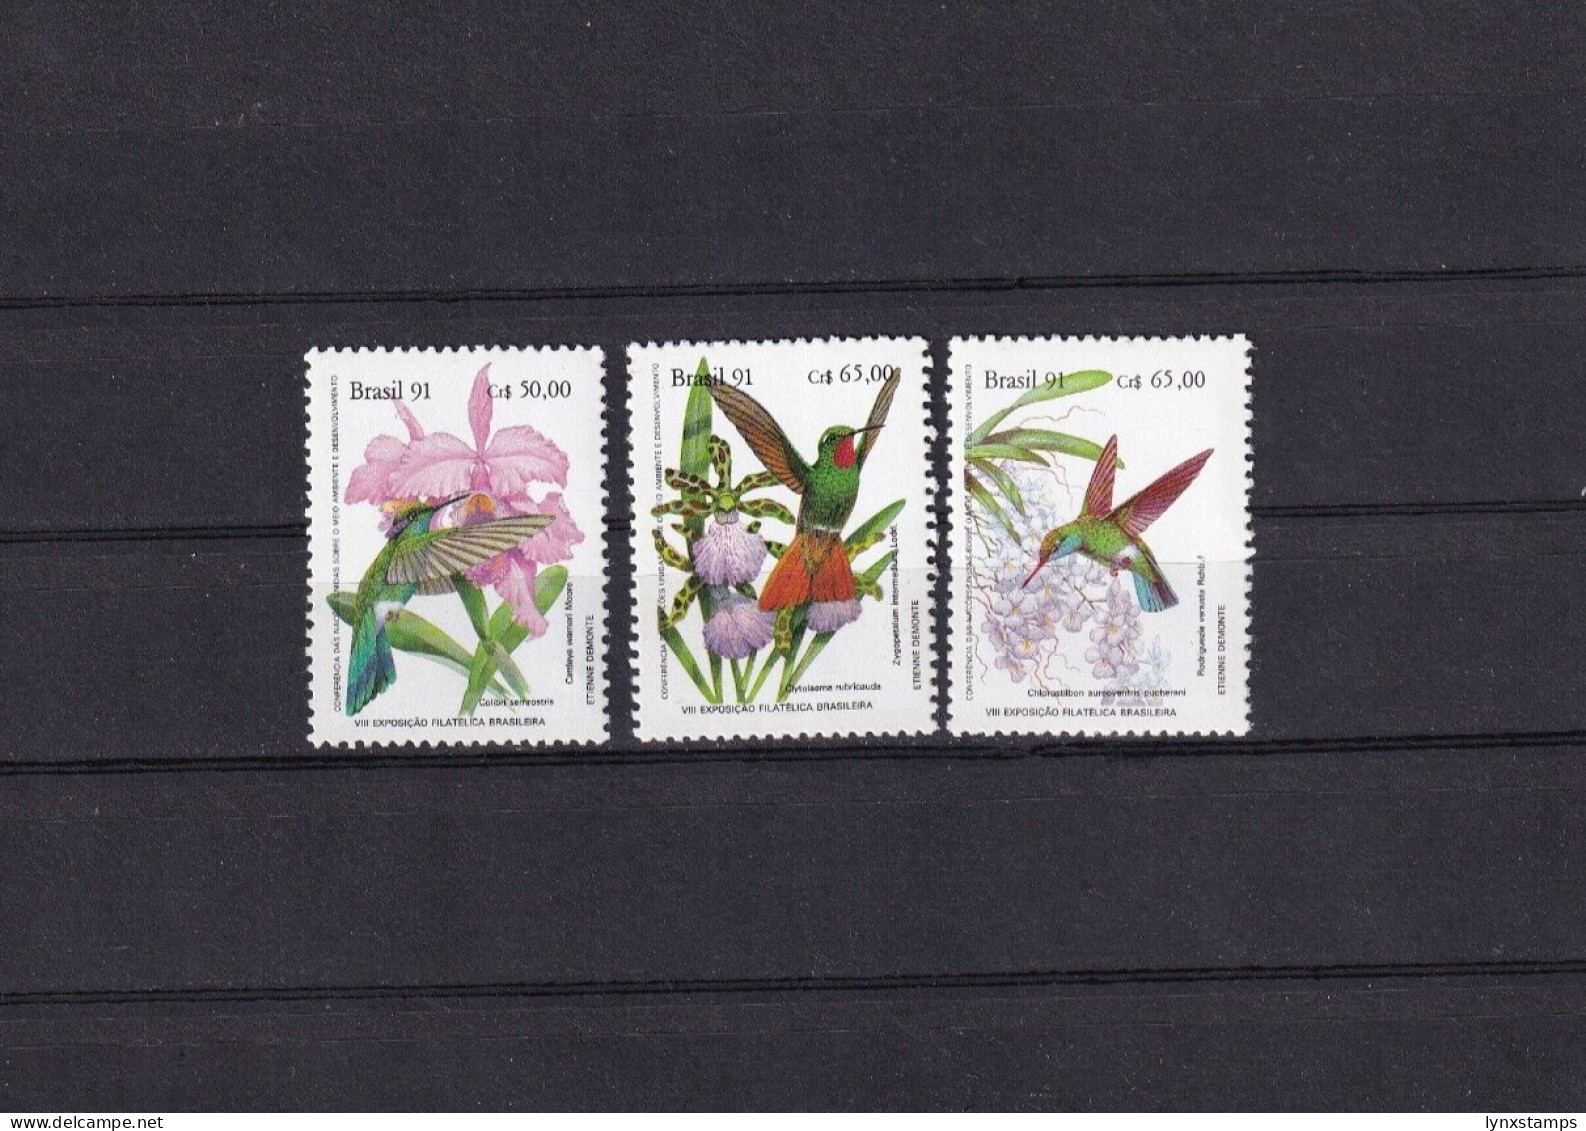 SA06 Brazil 1991 Nat Stamp Exhibition "Brapex 91"-Orchids And Birds Mint Stamps - Nuevos